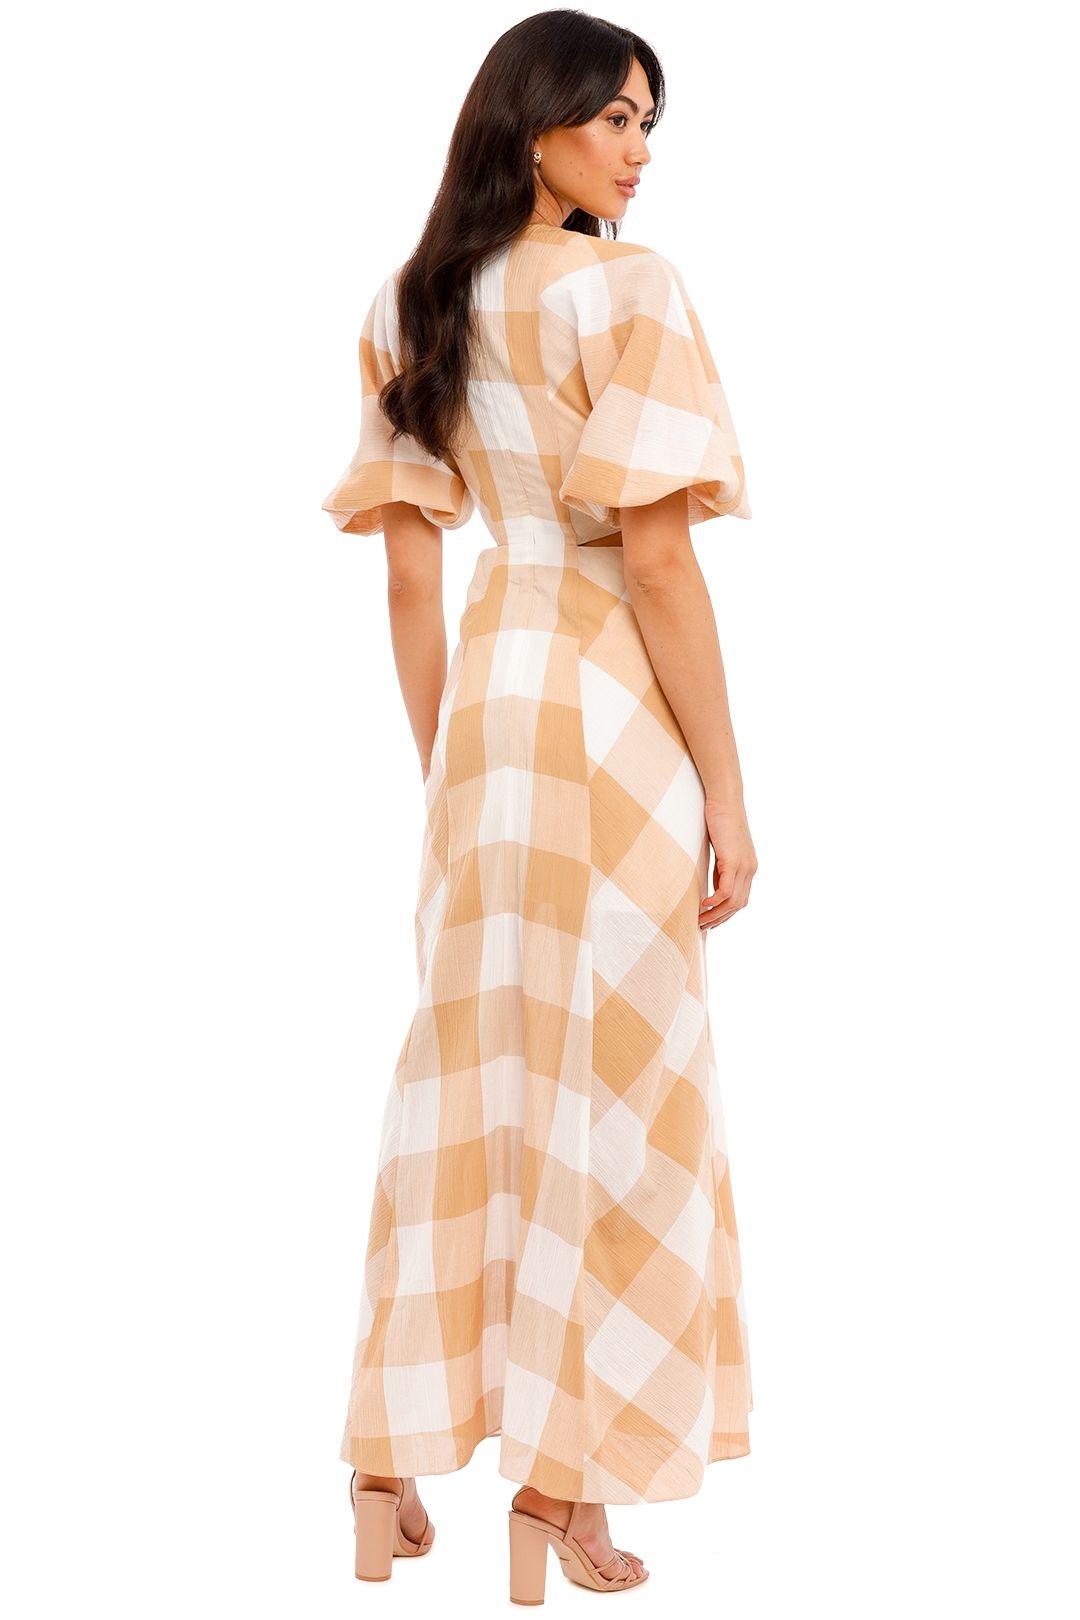 Significant Other Frida Dress in Caramel Check Beige